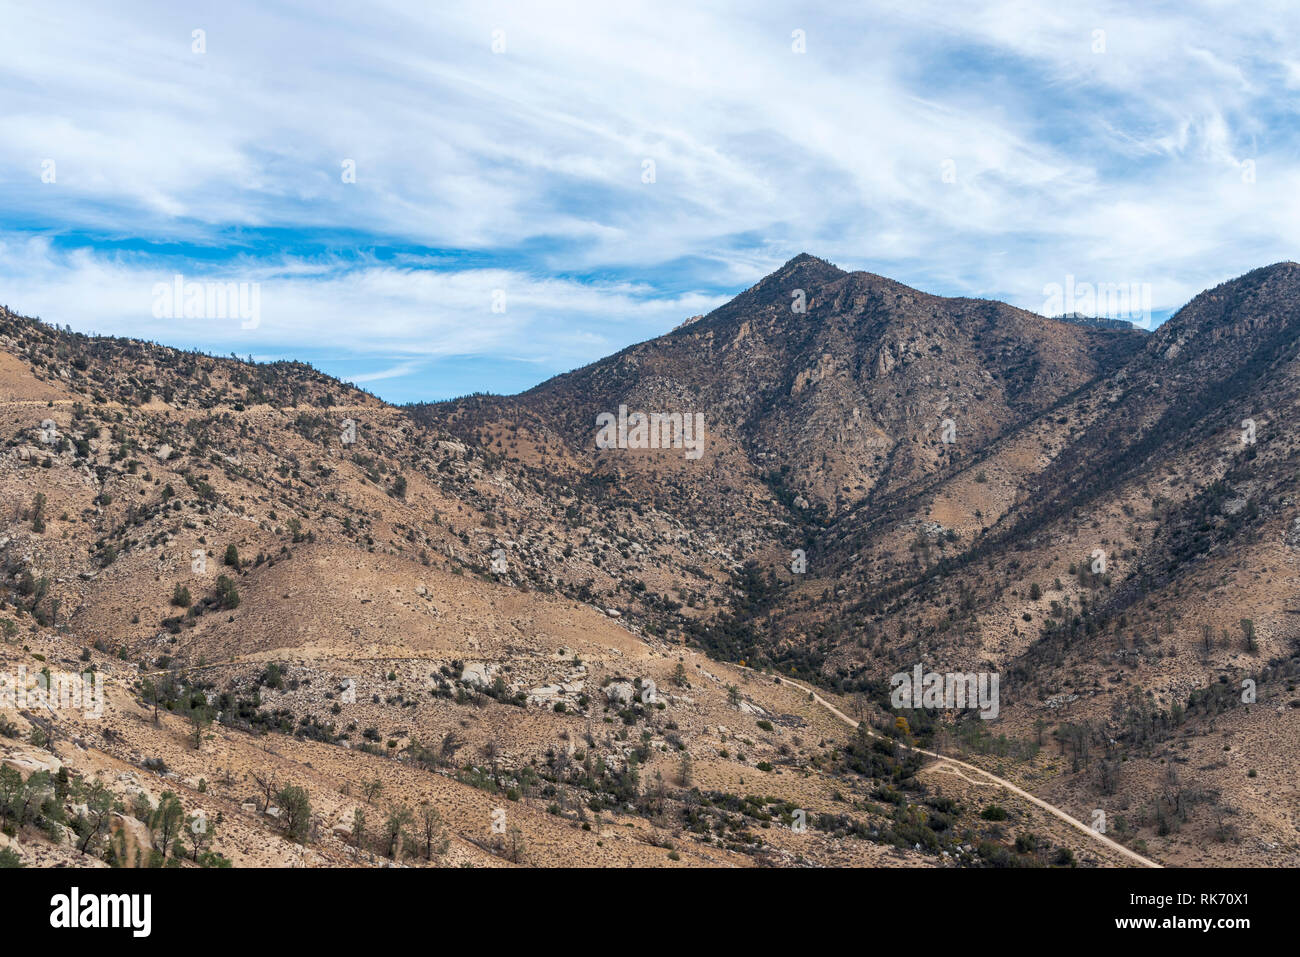 Looking across valley with mountains and trails leading to the top under bright blue sky with clouds. Sparse vegetation steep mountain sides. Stock Photo